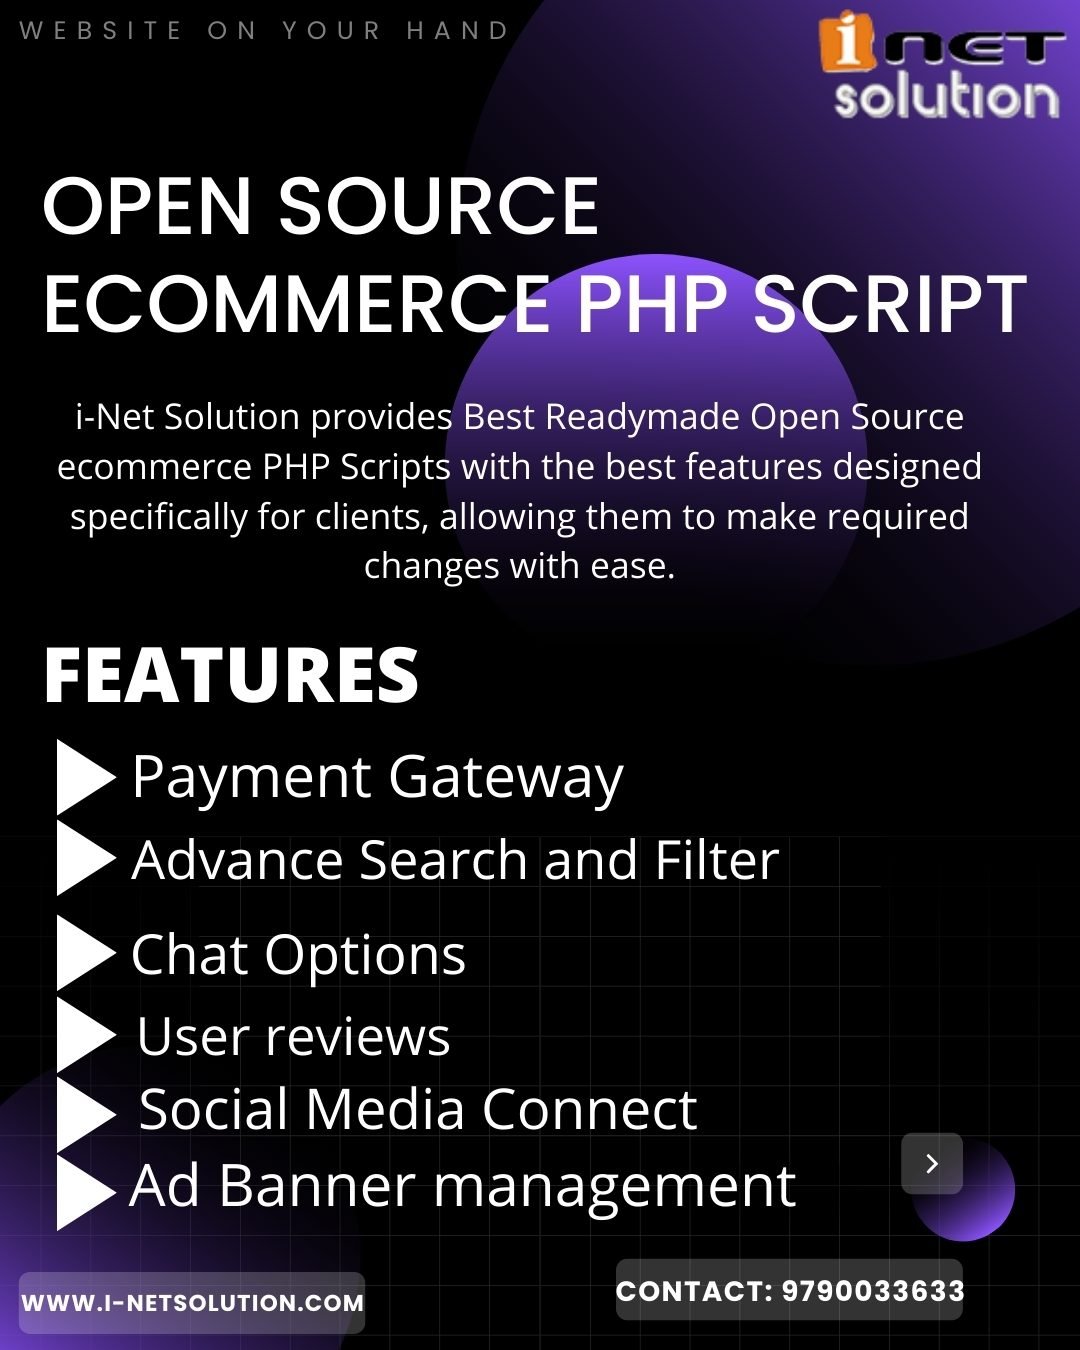 OpenSource eCommerce PHP script